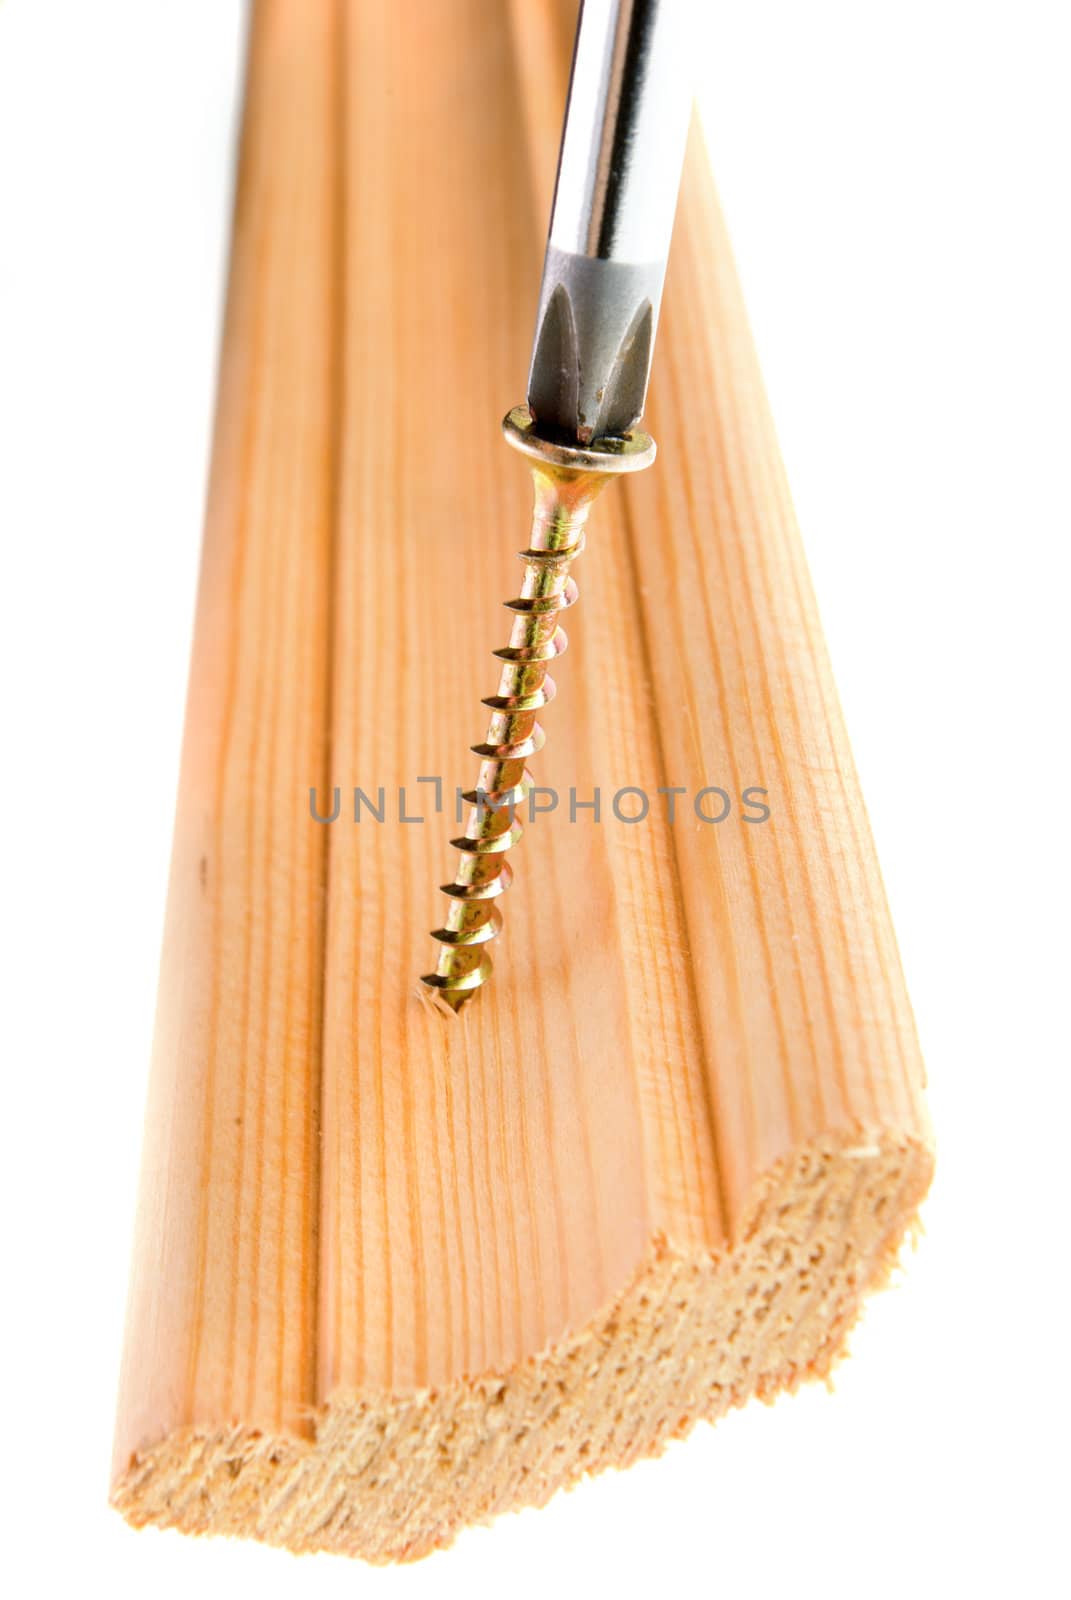 Screwdriver and single screw in board.a,isolated on white background. wooden plinth